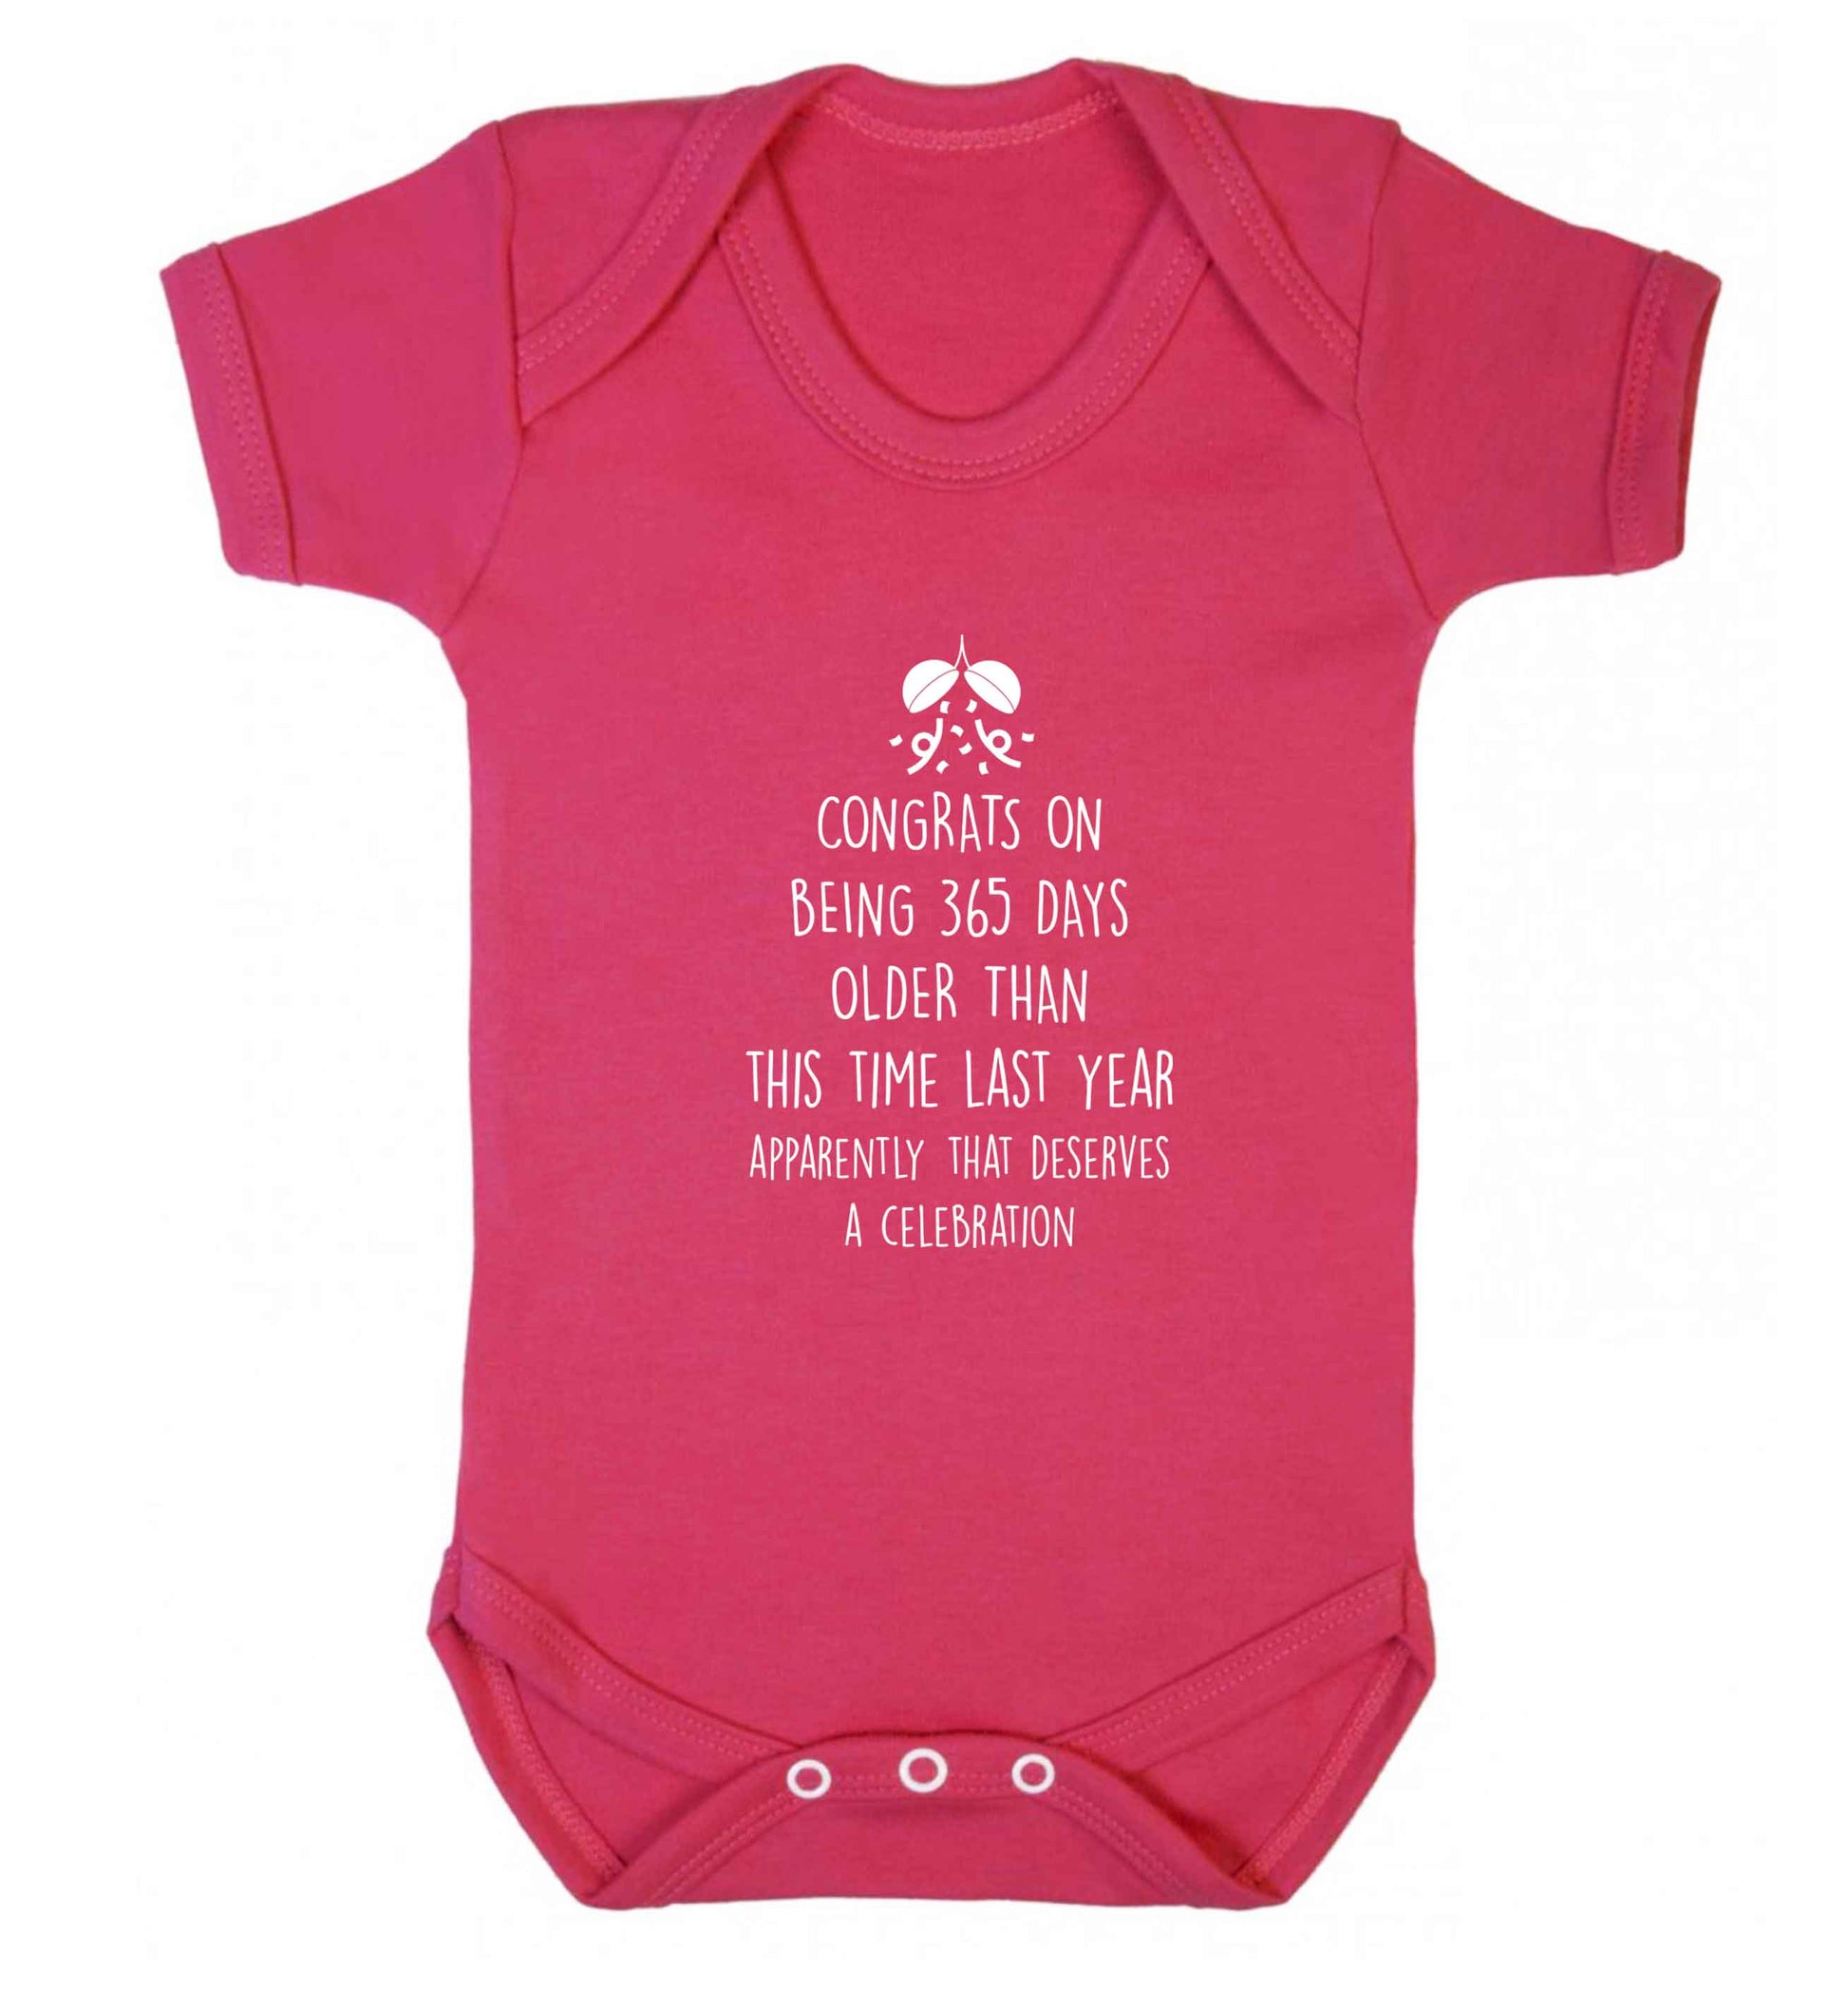 Congrats on being 365 days older than you were this time last year apparently that deserves a celebration baby vest dark pink 18-24 months